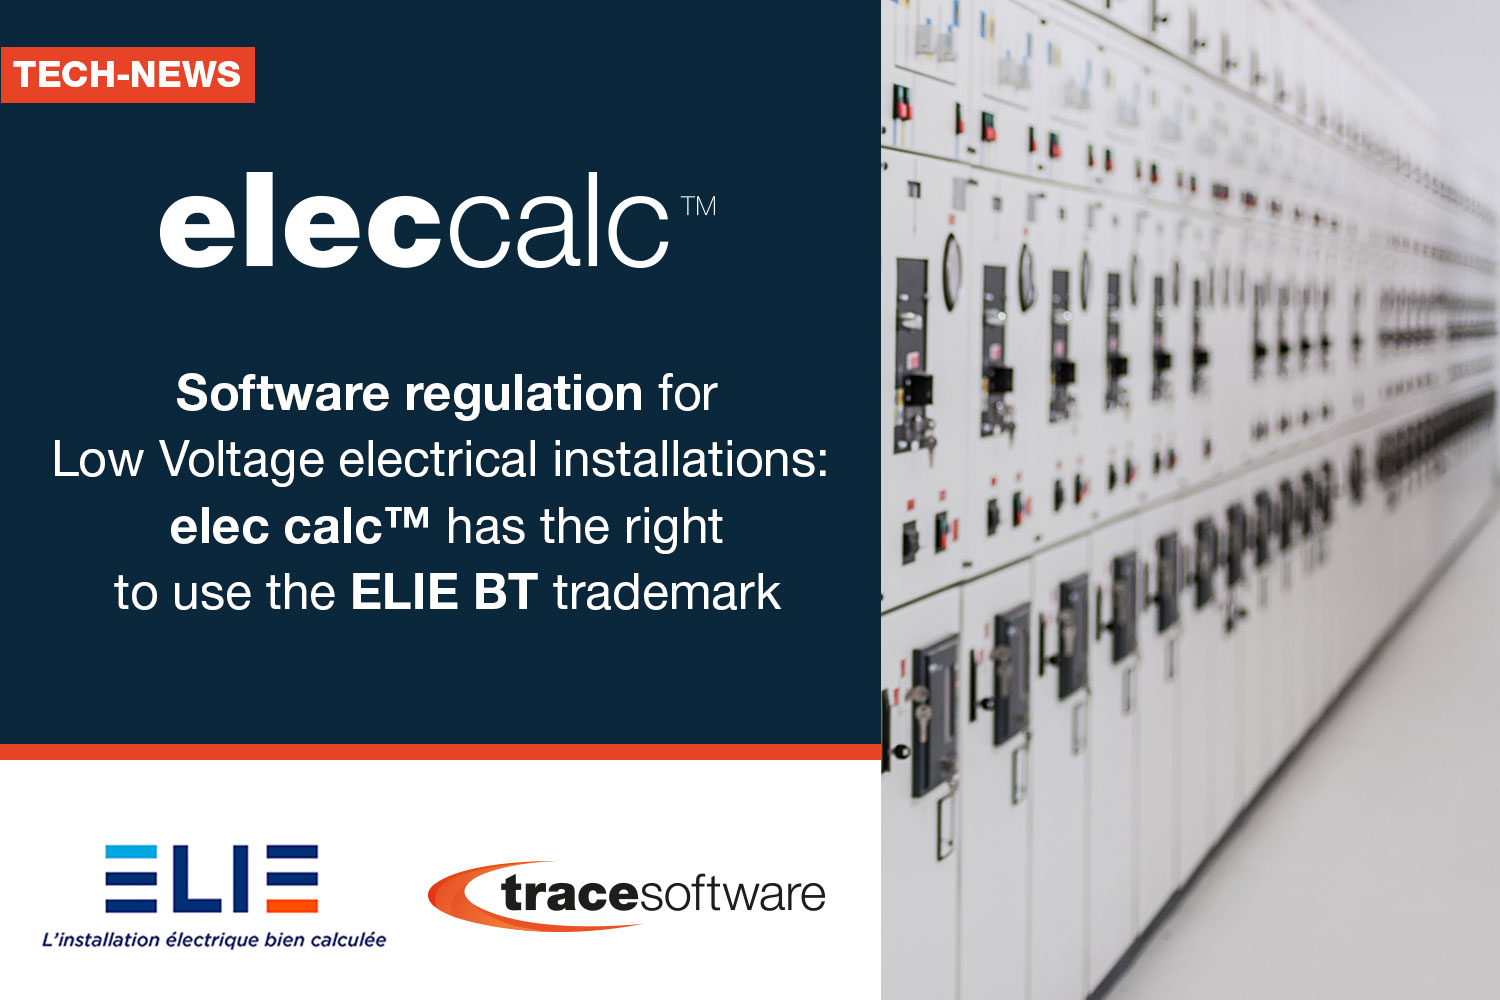 Software regulation for Low Voltage electrical installations: elec calc™ now has the right to use the ELIE BT trademark